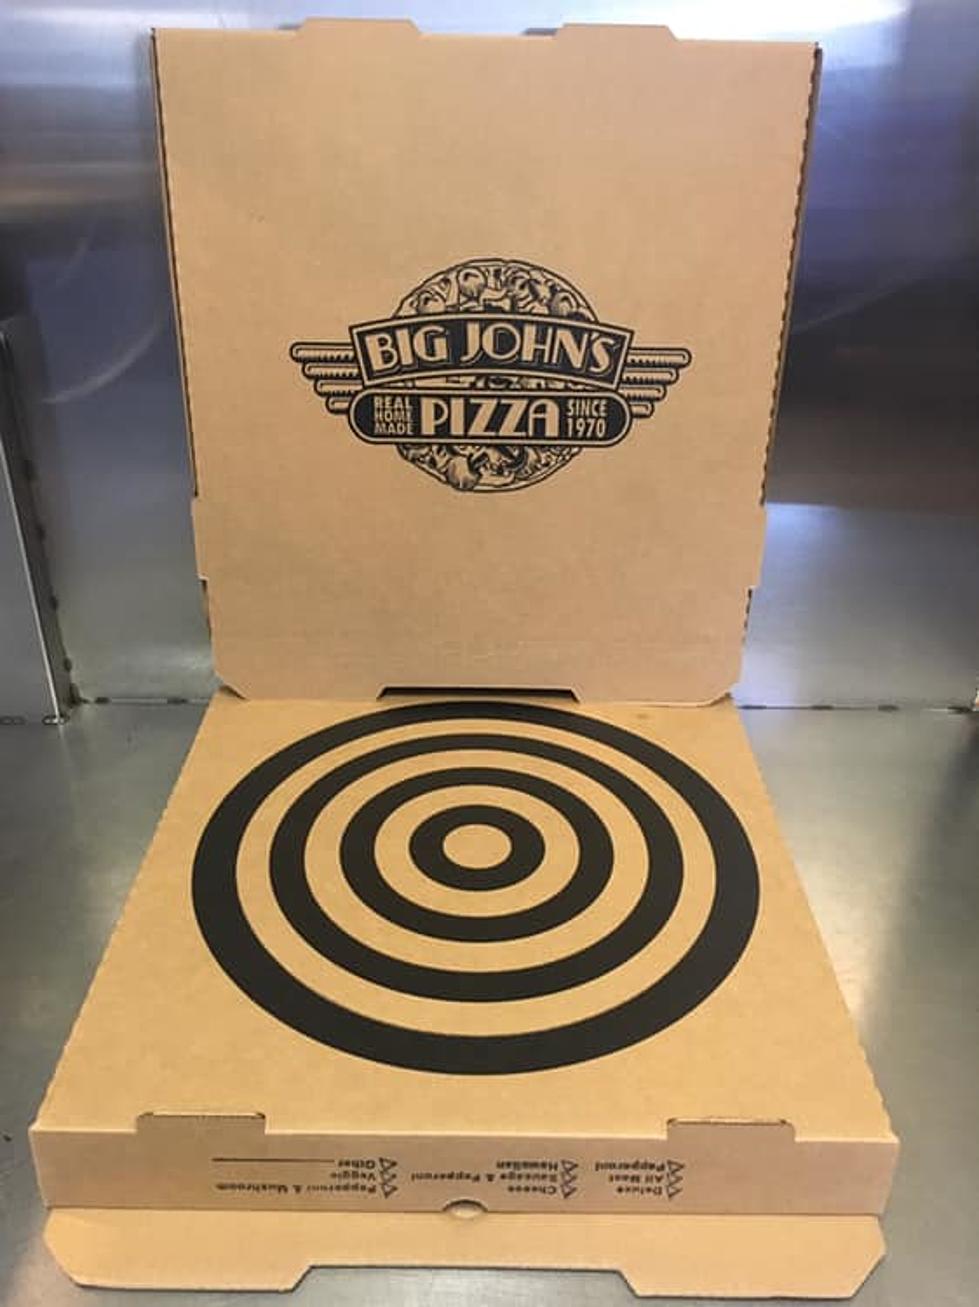 West MI Pizza Shop ‘on Target’ With Their Boxes For Fall